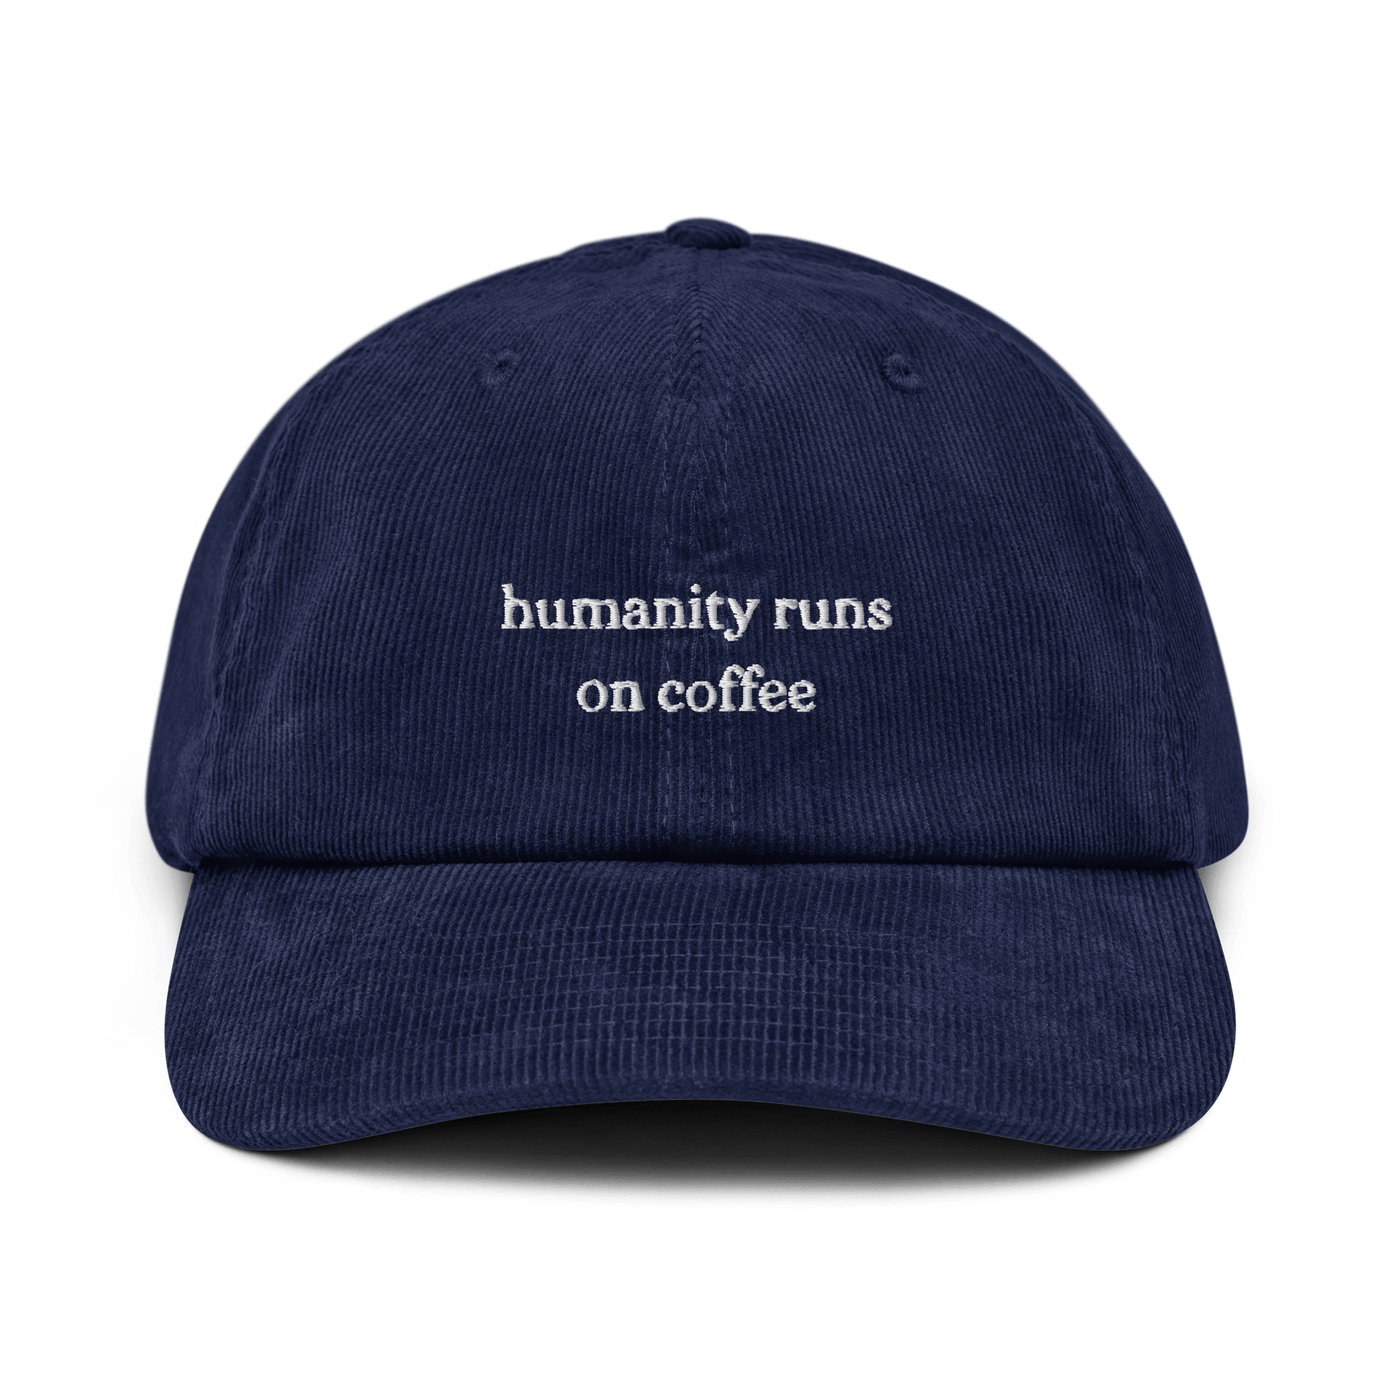 Humanity Runs on Coffee Corduroy hat - Oxford Navy - - Just Another Cap Store